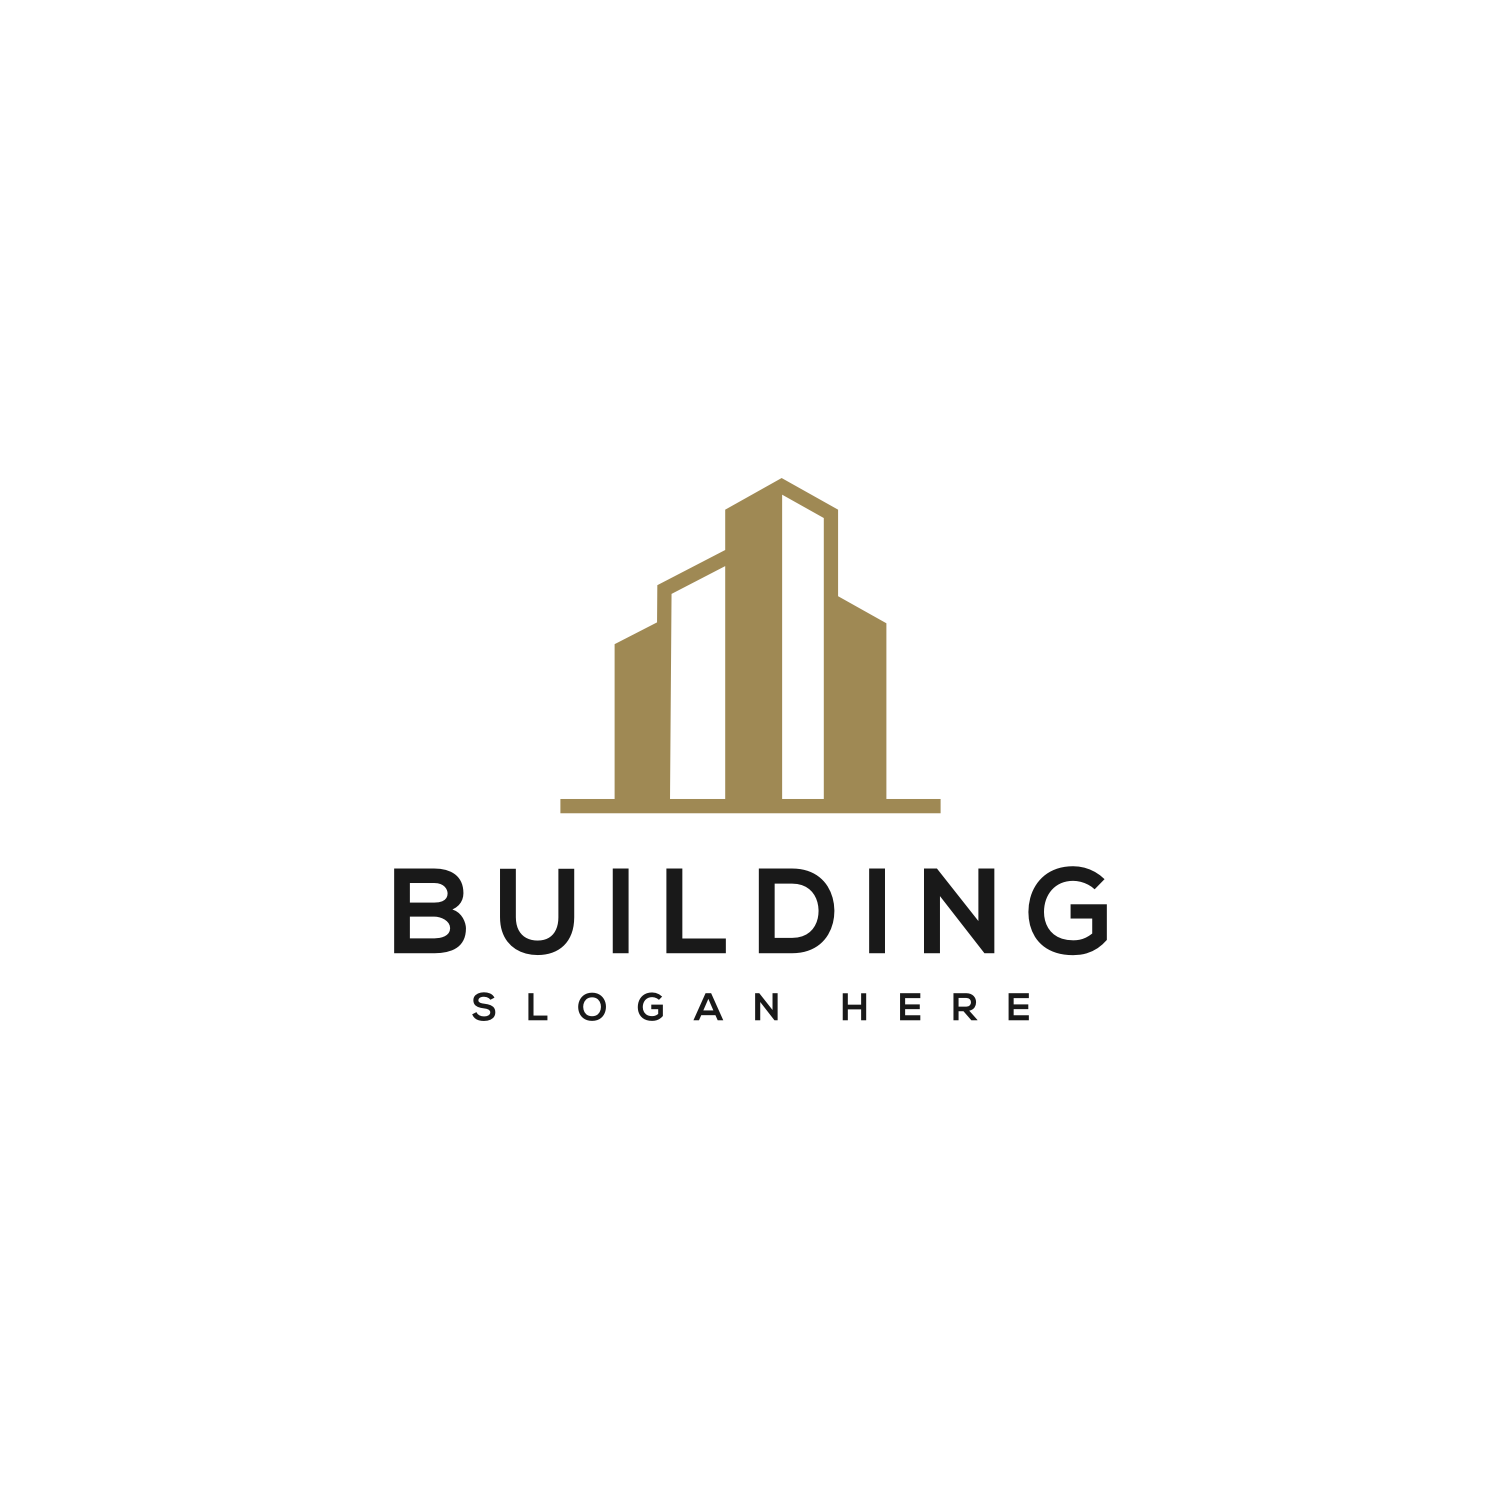 Building Logo with Line Art Style.